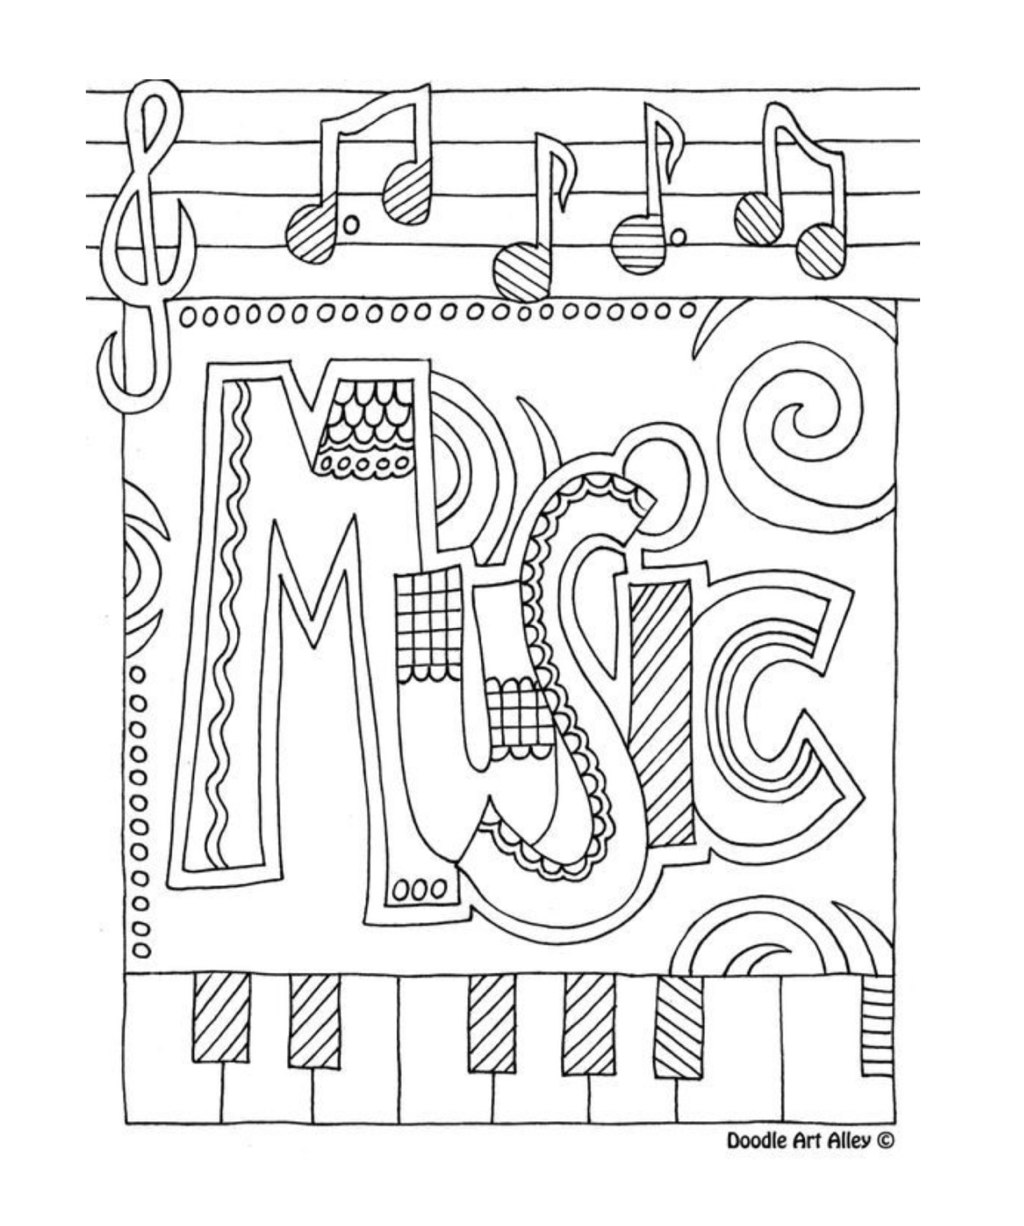 Getting Crafty with Music - MARIGOLD MUSIC